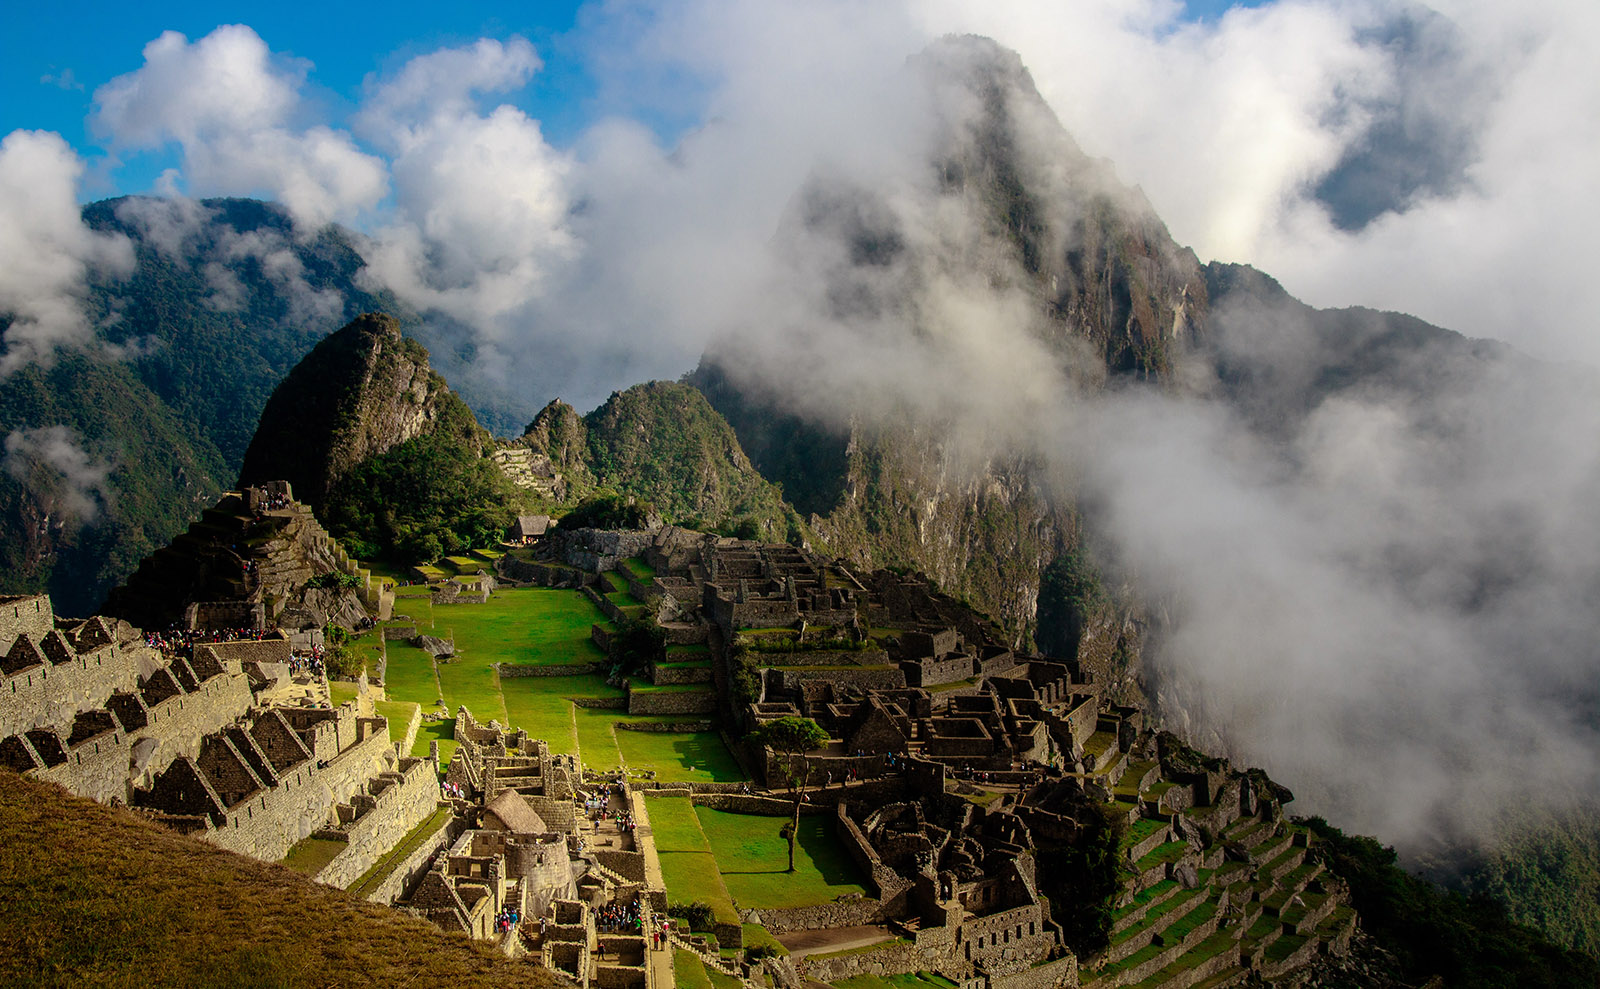 SSoP Podcast Ep. 20 — Peru: Andes Adventures, Fusion Food, and Piles of Gold